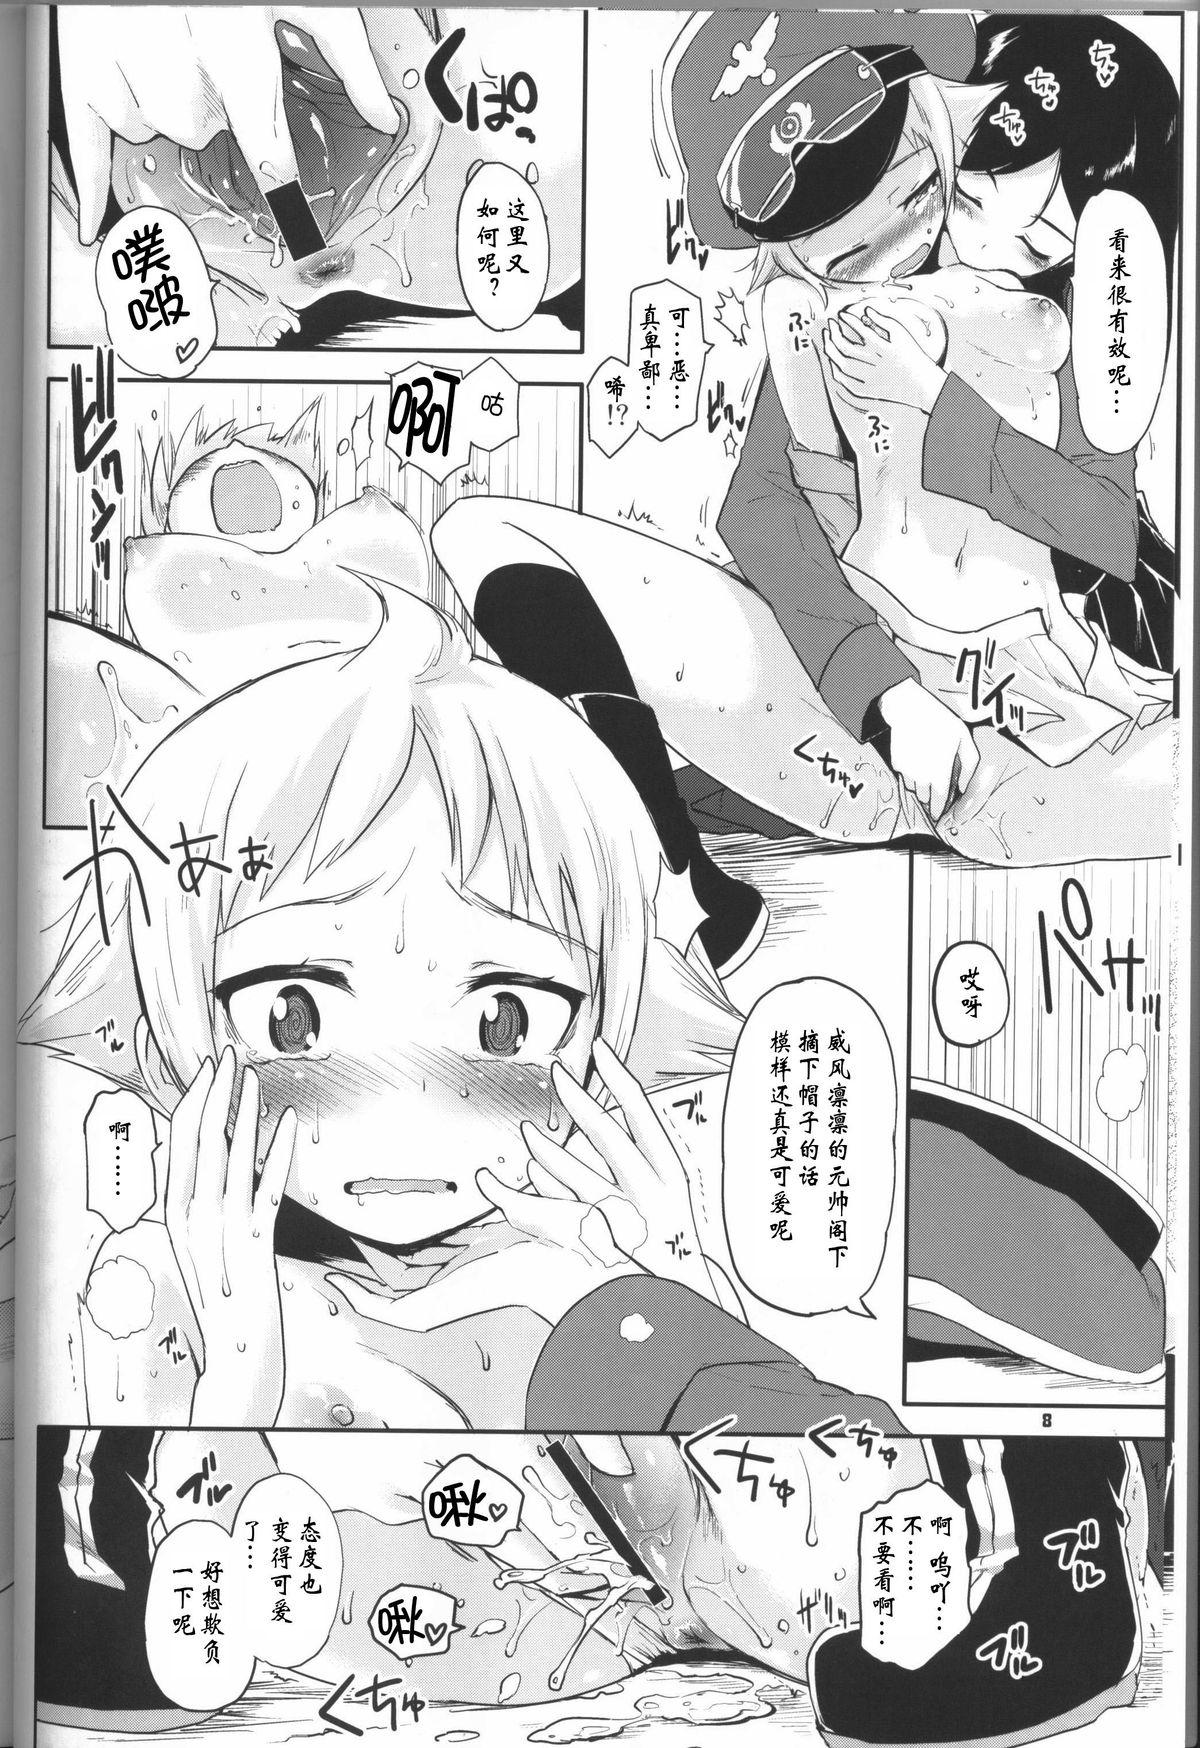 Foot Fetish The General Frost Has Come! - Girls und panzer Free Oral Sex - Page 7